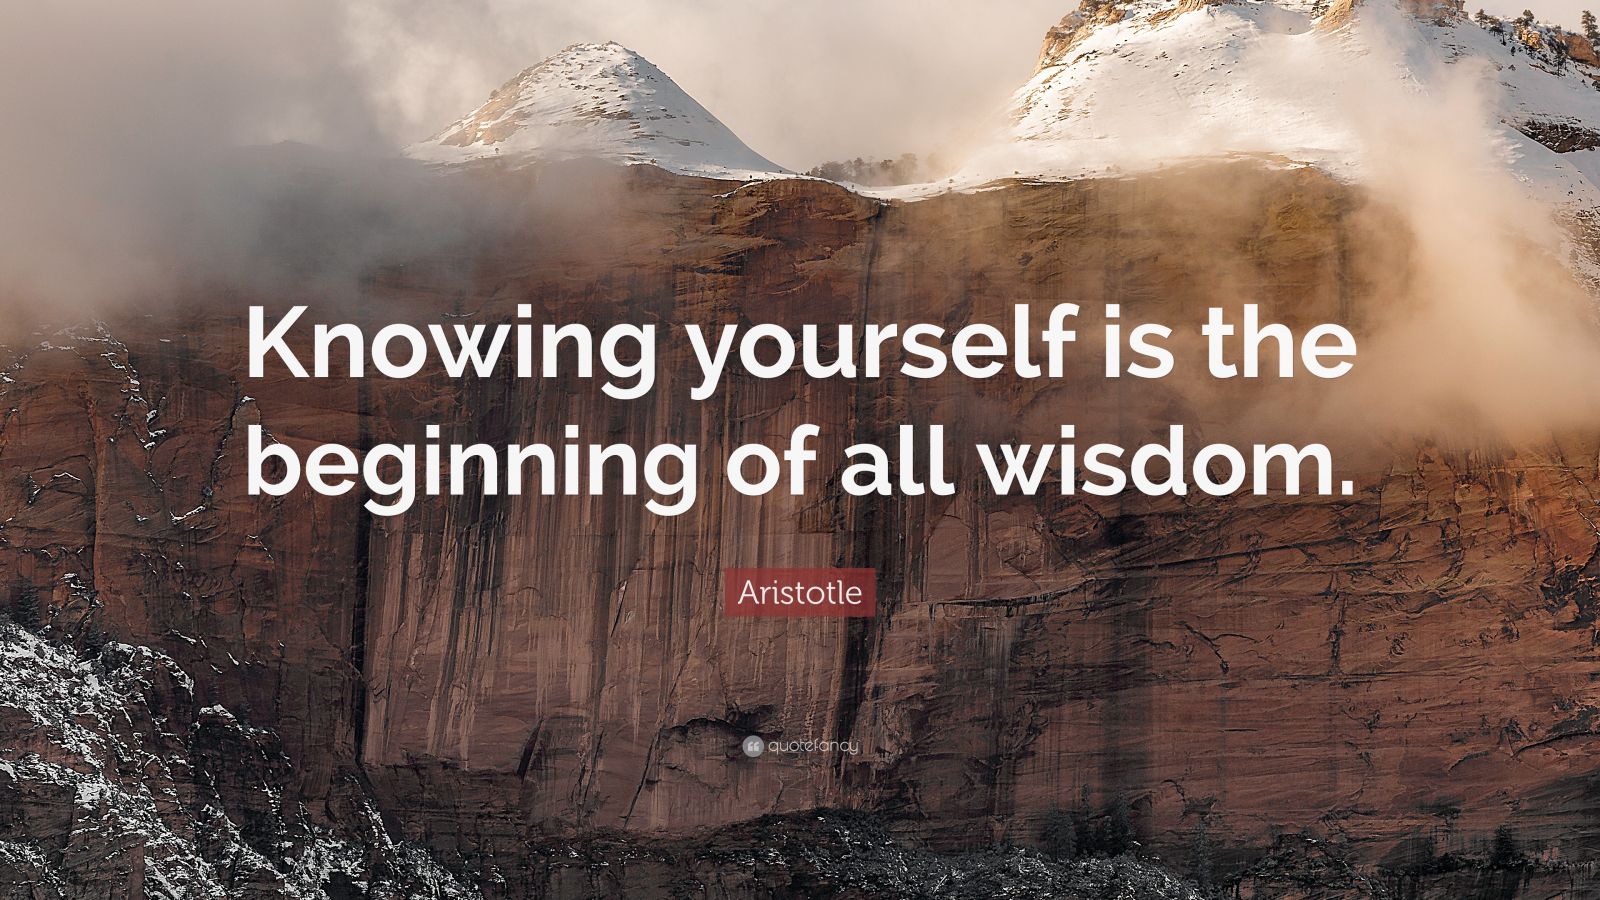 Aristotle Quote: "Knowing yourself is the beginning of all ...